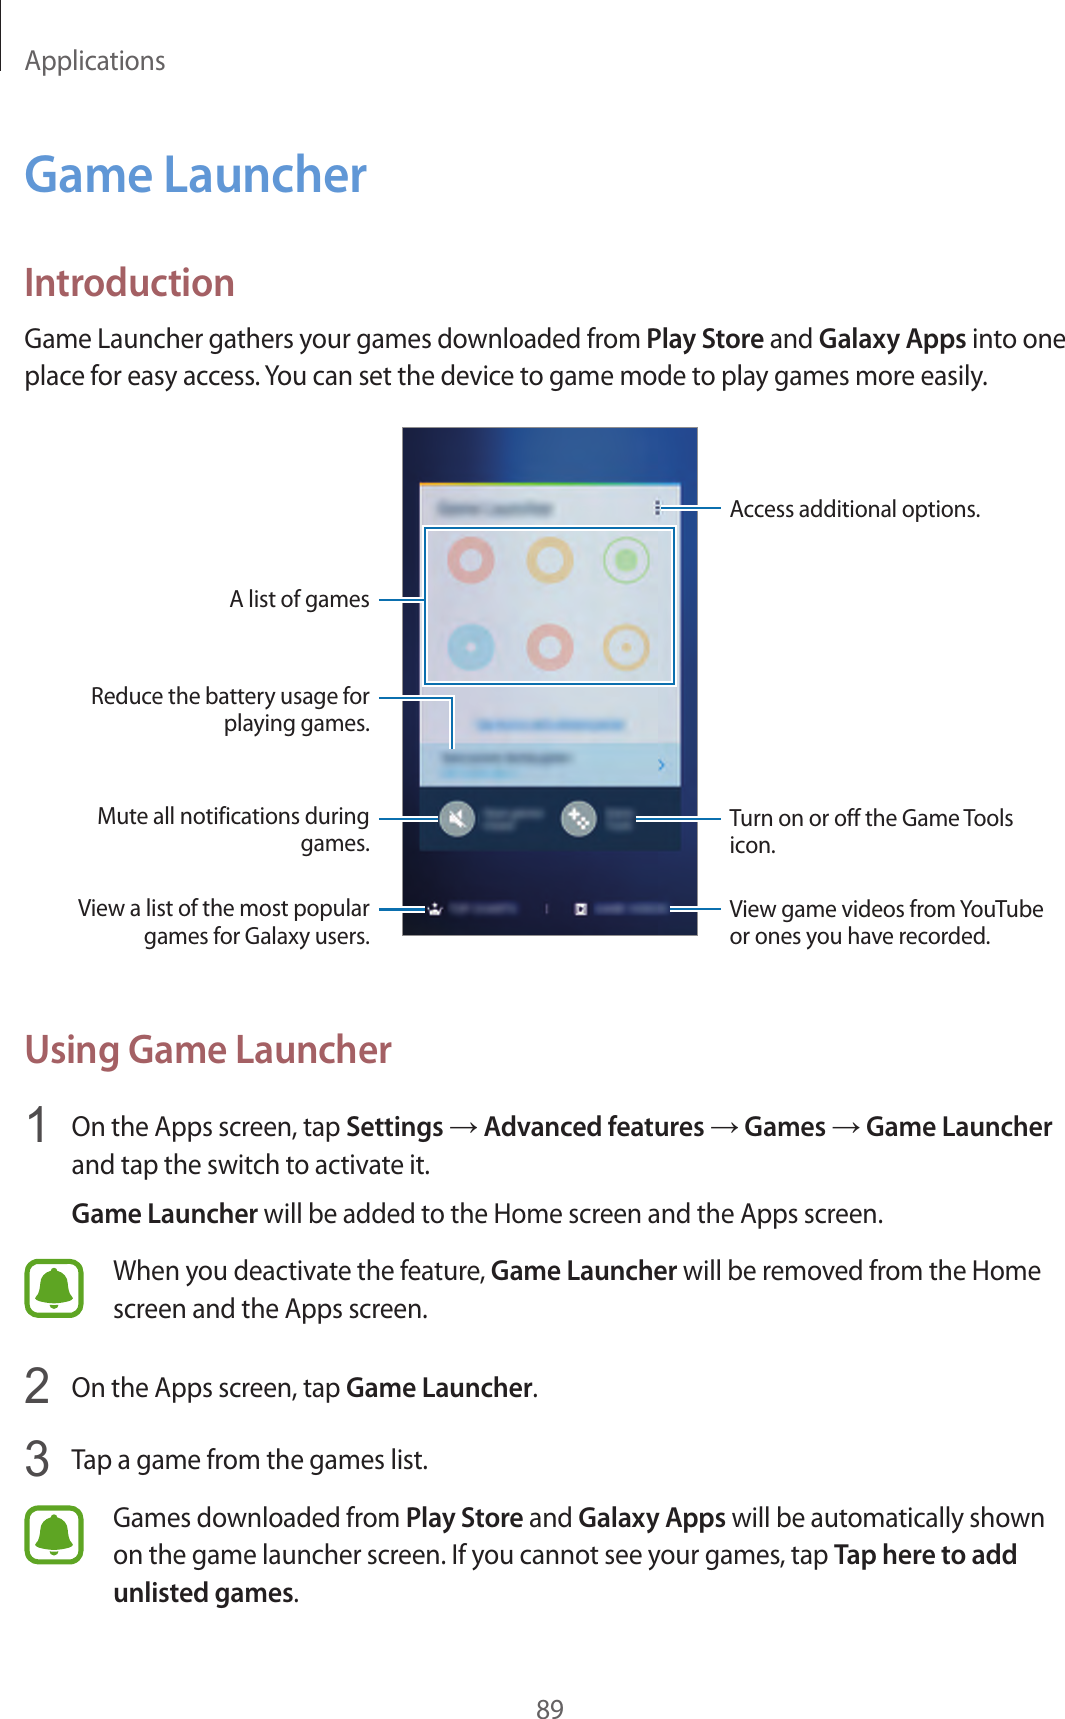 Applications89Game LauncherIntroductionGame Launcher gathers your games downloaded from Play Store and Galaxy Apps into one place for easy access. You can set the device to game mode to play games more easily.Access additional options.A list of gamesMute all notifications during games.Reduce the battery usage for playing games.Turn on or off the Game Tools icon.View game videos from YouTube or ones you have recorded.View a list of the most popular games for Galaxy users.Using Game Launcher1  On the Apps screen, tap Settings → Advanced features → Games → Game Launcher and tap the switch to activate it.Game Launcher will be added to the Home screen and the Apps screen.When you deactivate the feature, Game Launcher will be removed from the Home screen and the Apps screen.2  On the Apps screen, tap Game Launcher.3  Tap a game from the games list.Games downloaded from Play Store and Galaxy Apps will be automatically shown on the game launcher screen. If you cannot see your games, tap Tap here to add unlisted games.